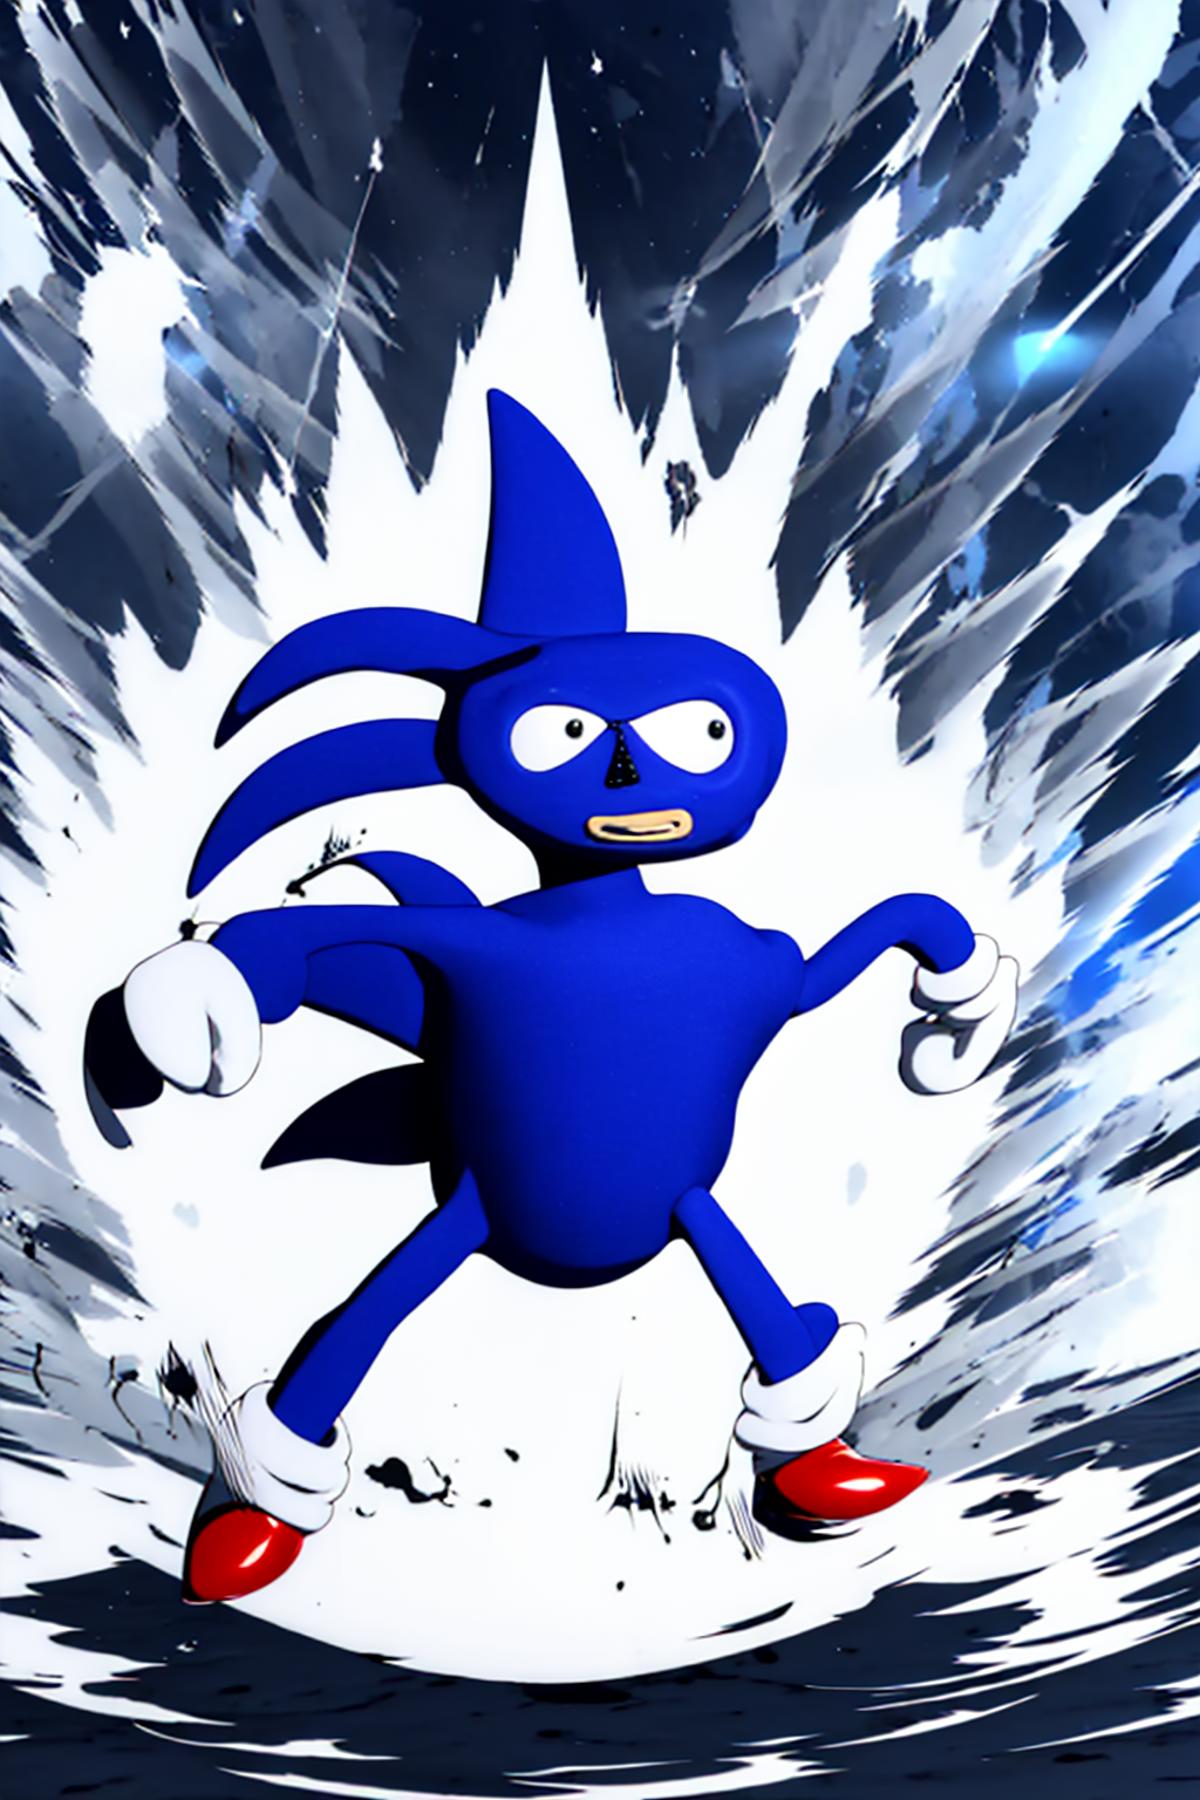 A Sonic the Hedgehog character in a blue and black suit is in the middle of a white and blue background.